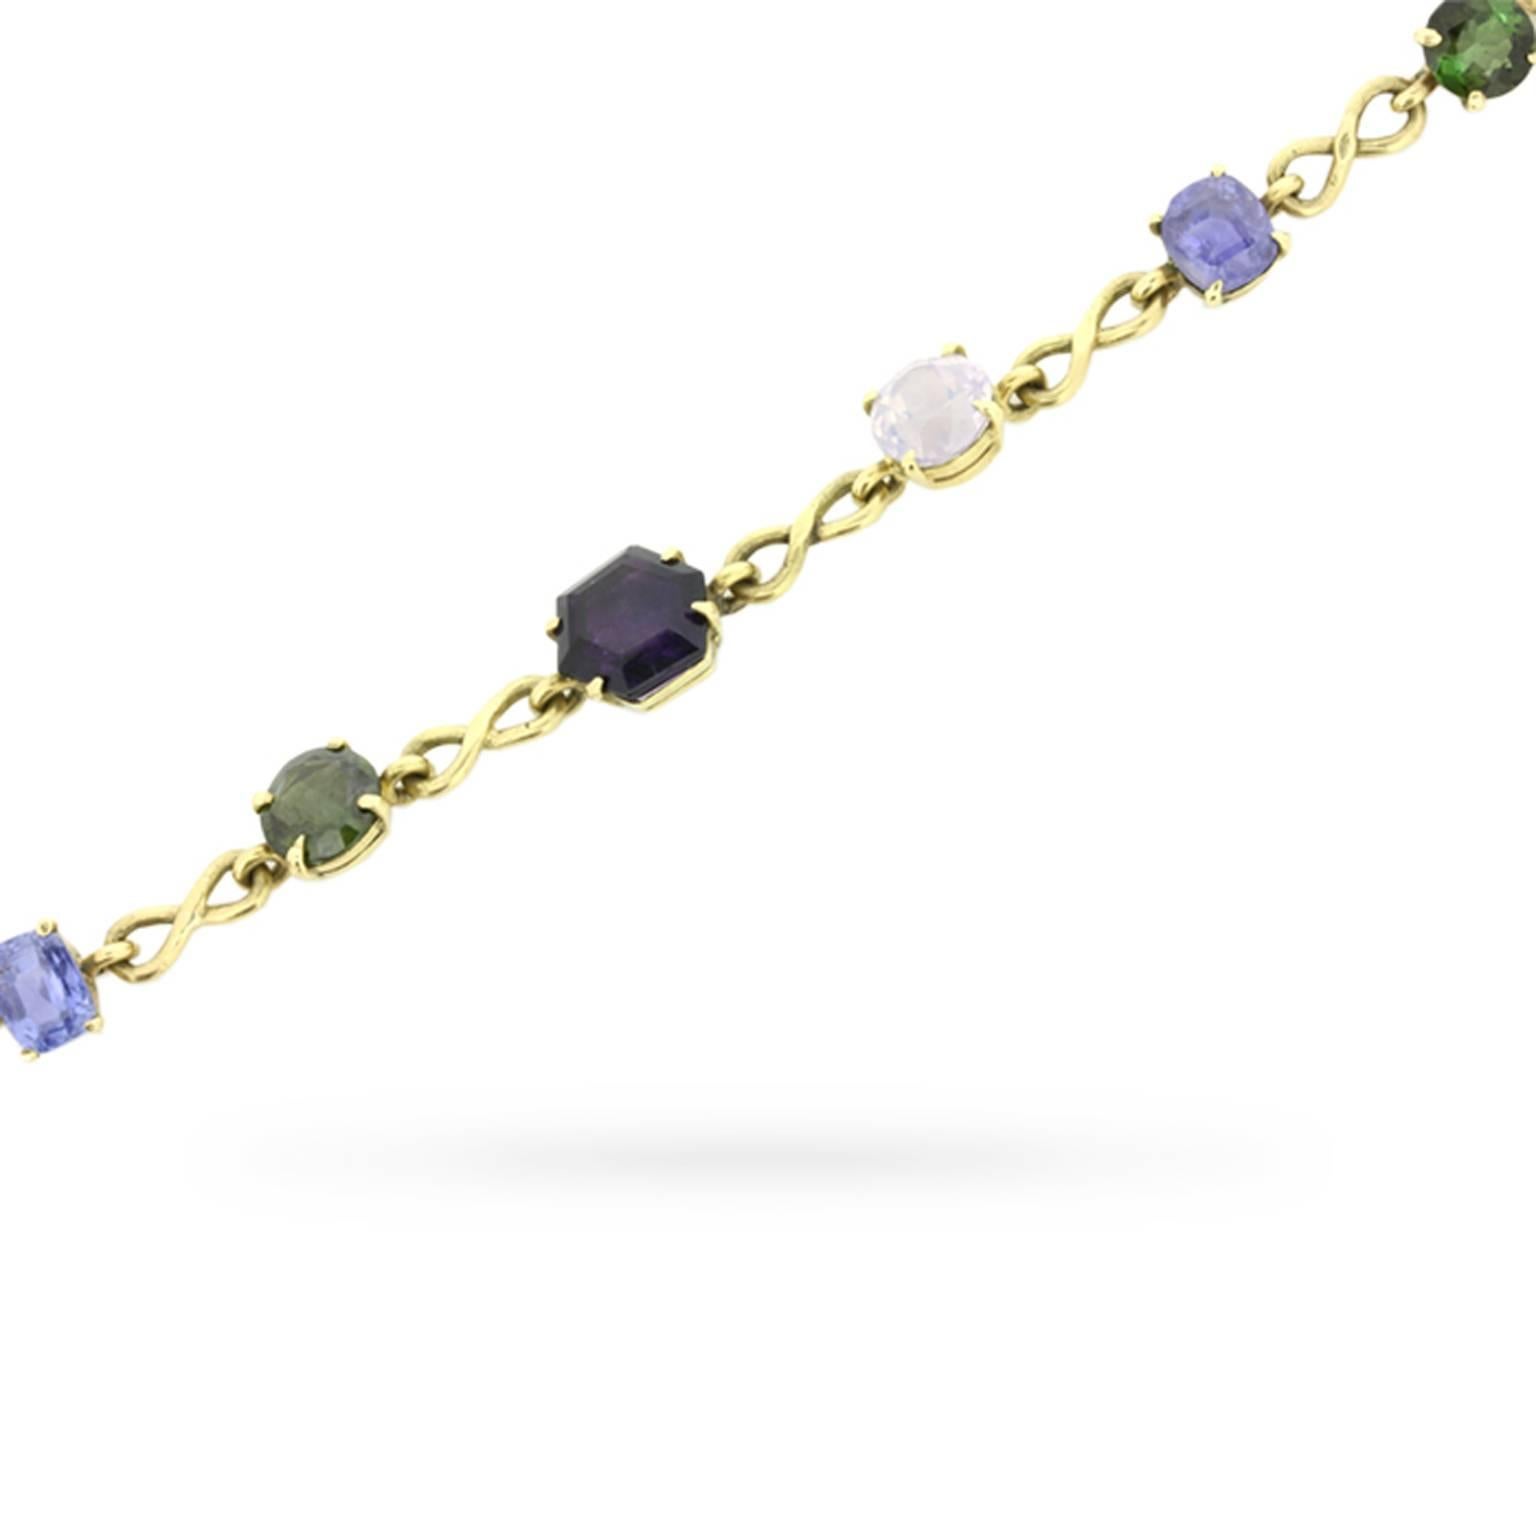 This vintage circa 1960s multi-gem bracelet features a colourful array of precious and semi-precious gemstones claw-set in open back mountings connected by infinity links in 18 carat yellow gold. The gemstones include sapphire, yellow sapphire,